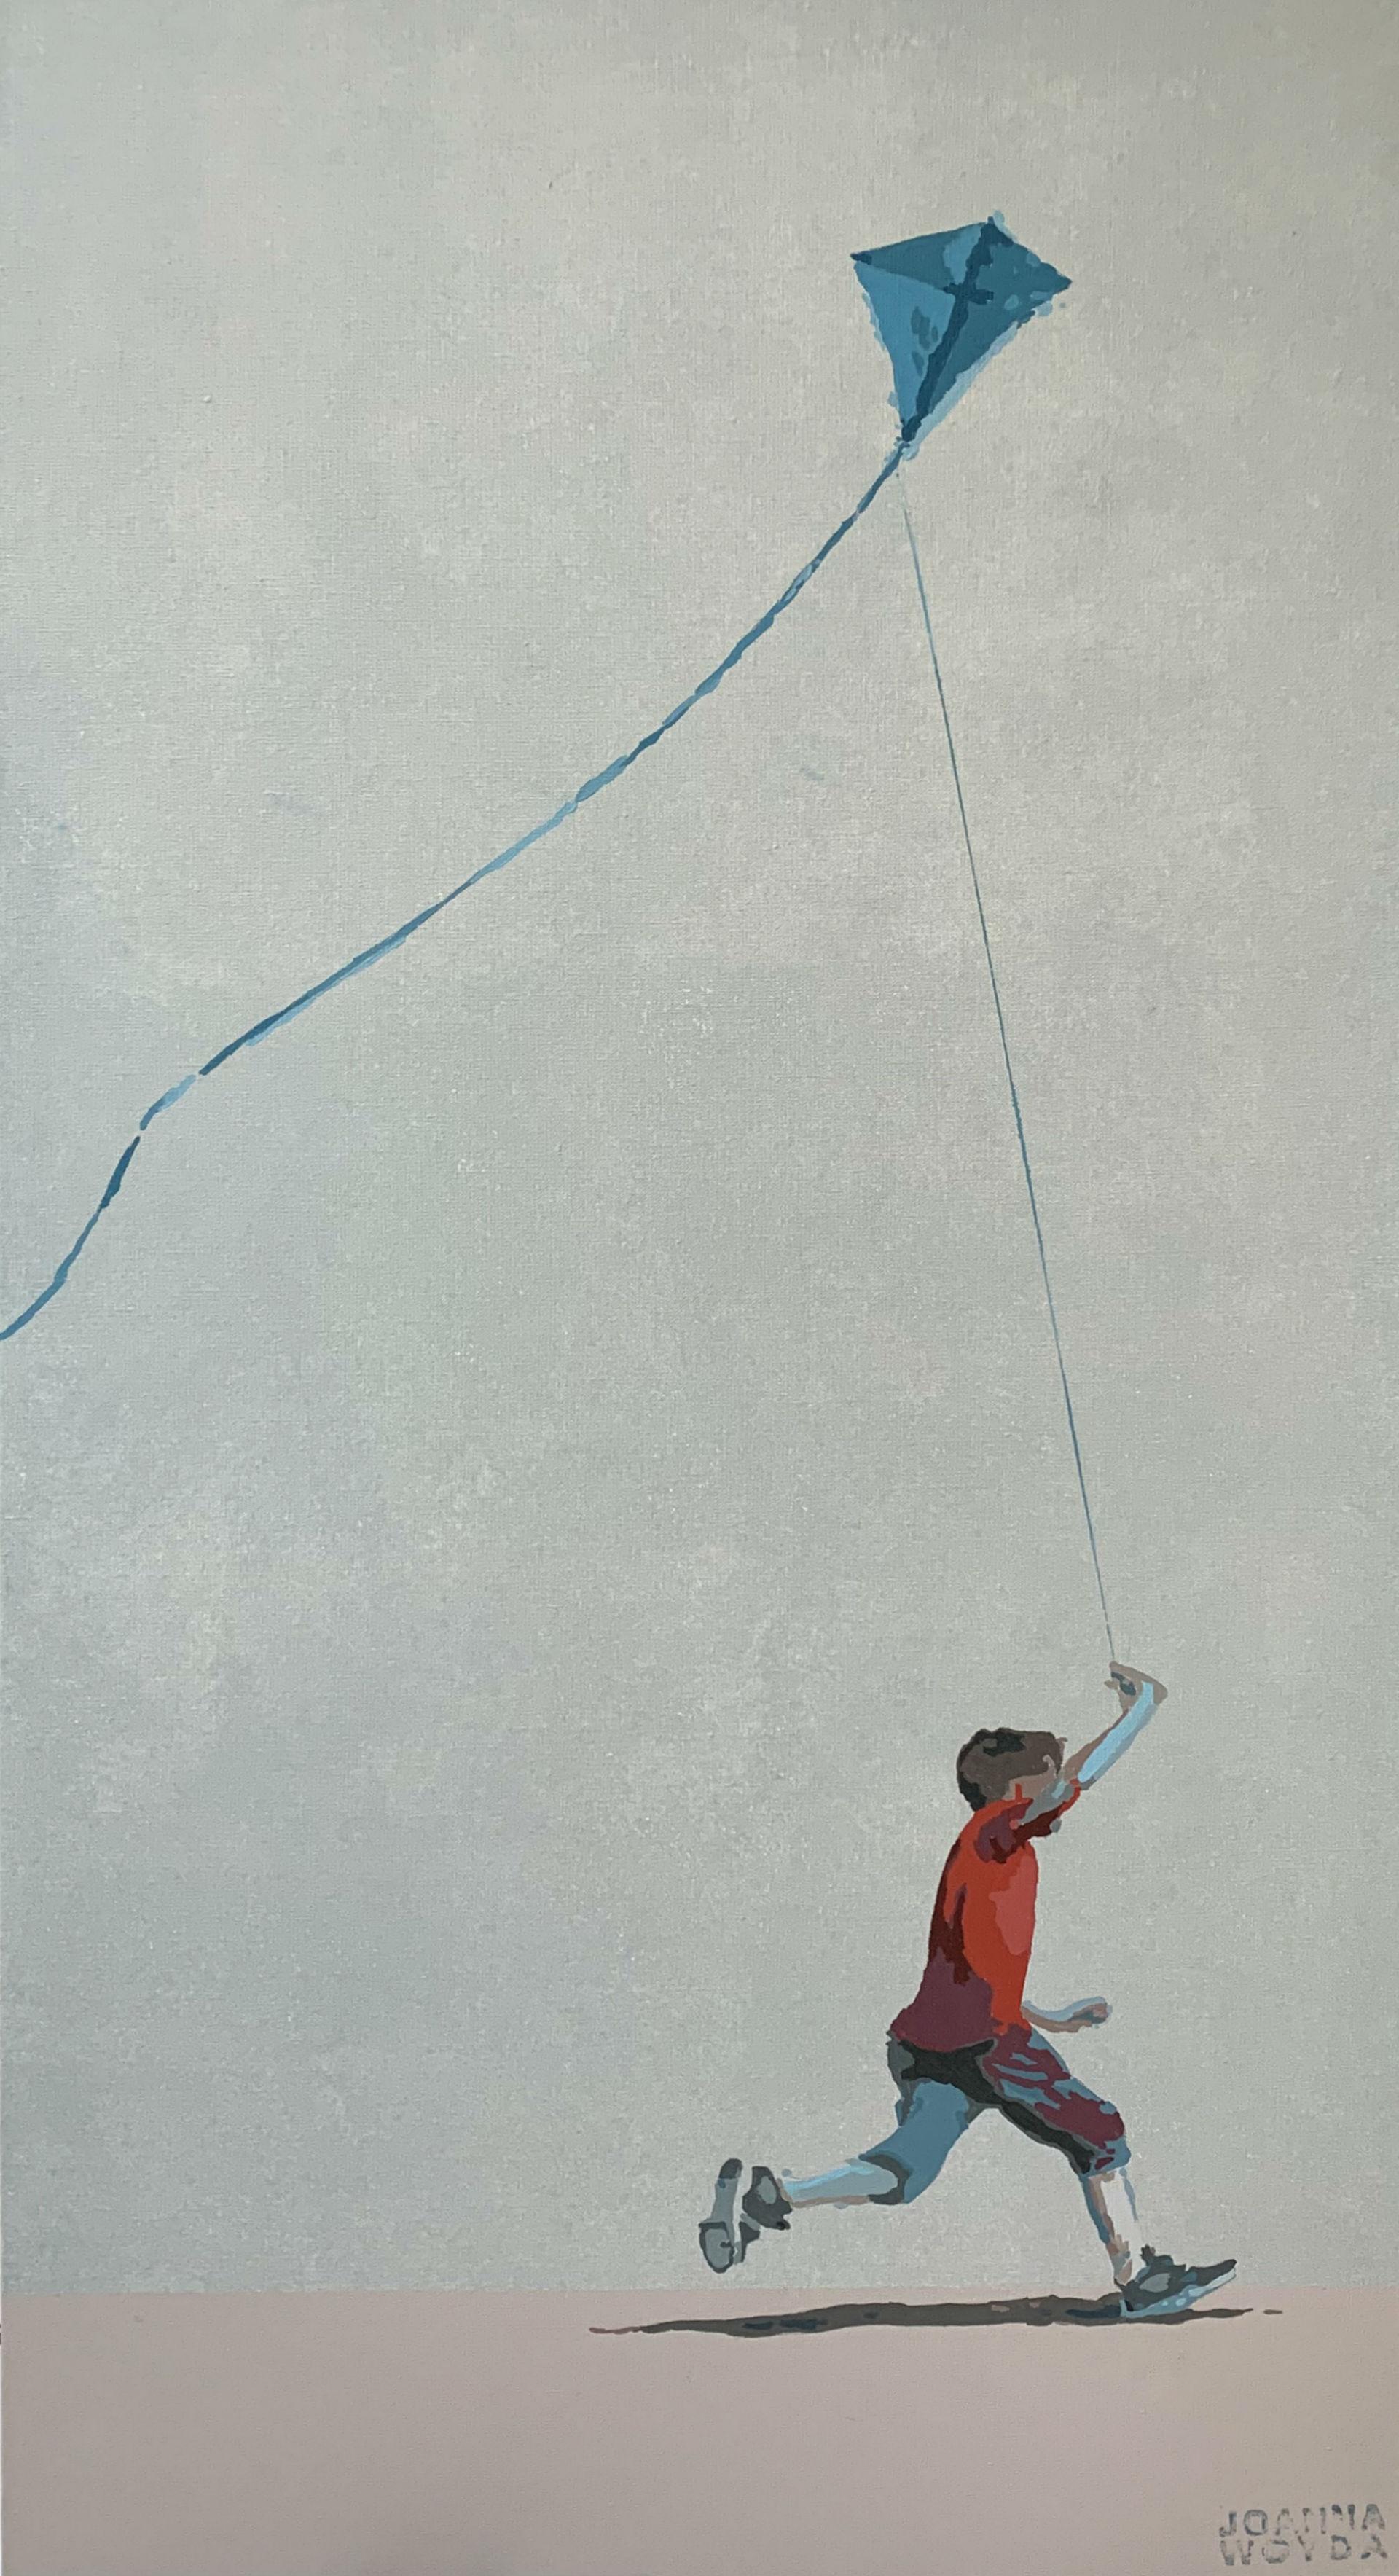 Joanna Woyda Portrait Painting - Boy in a red blouse with a kite - Contemporary Figurative Painting, Minimalism